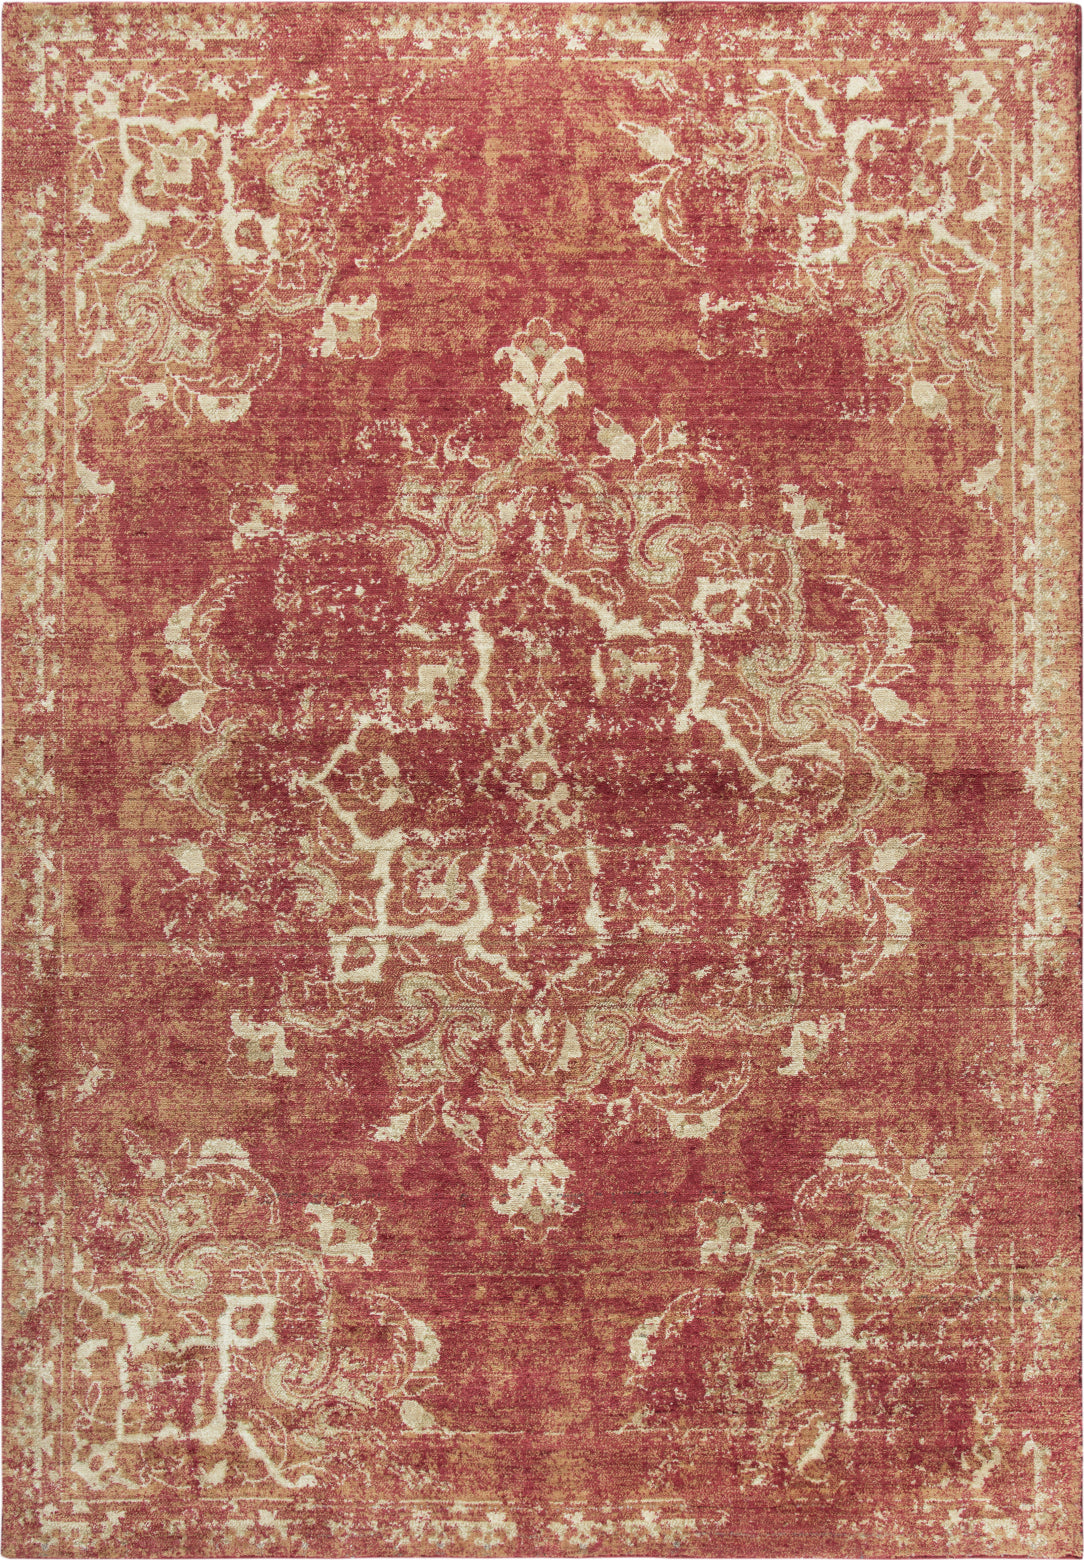 Rizzy Gossamer GS6147 Red Area Rug main image